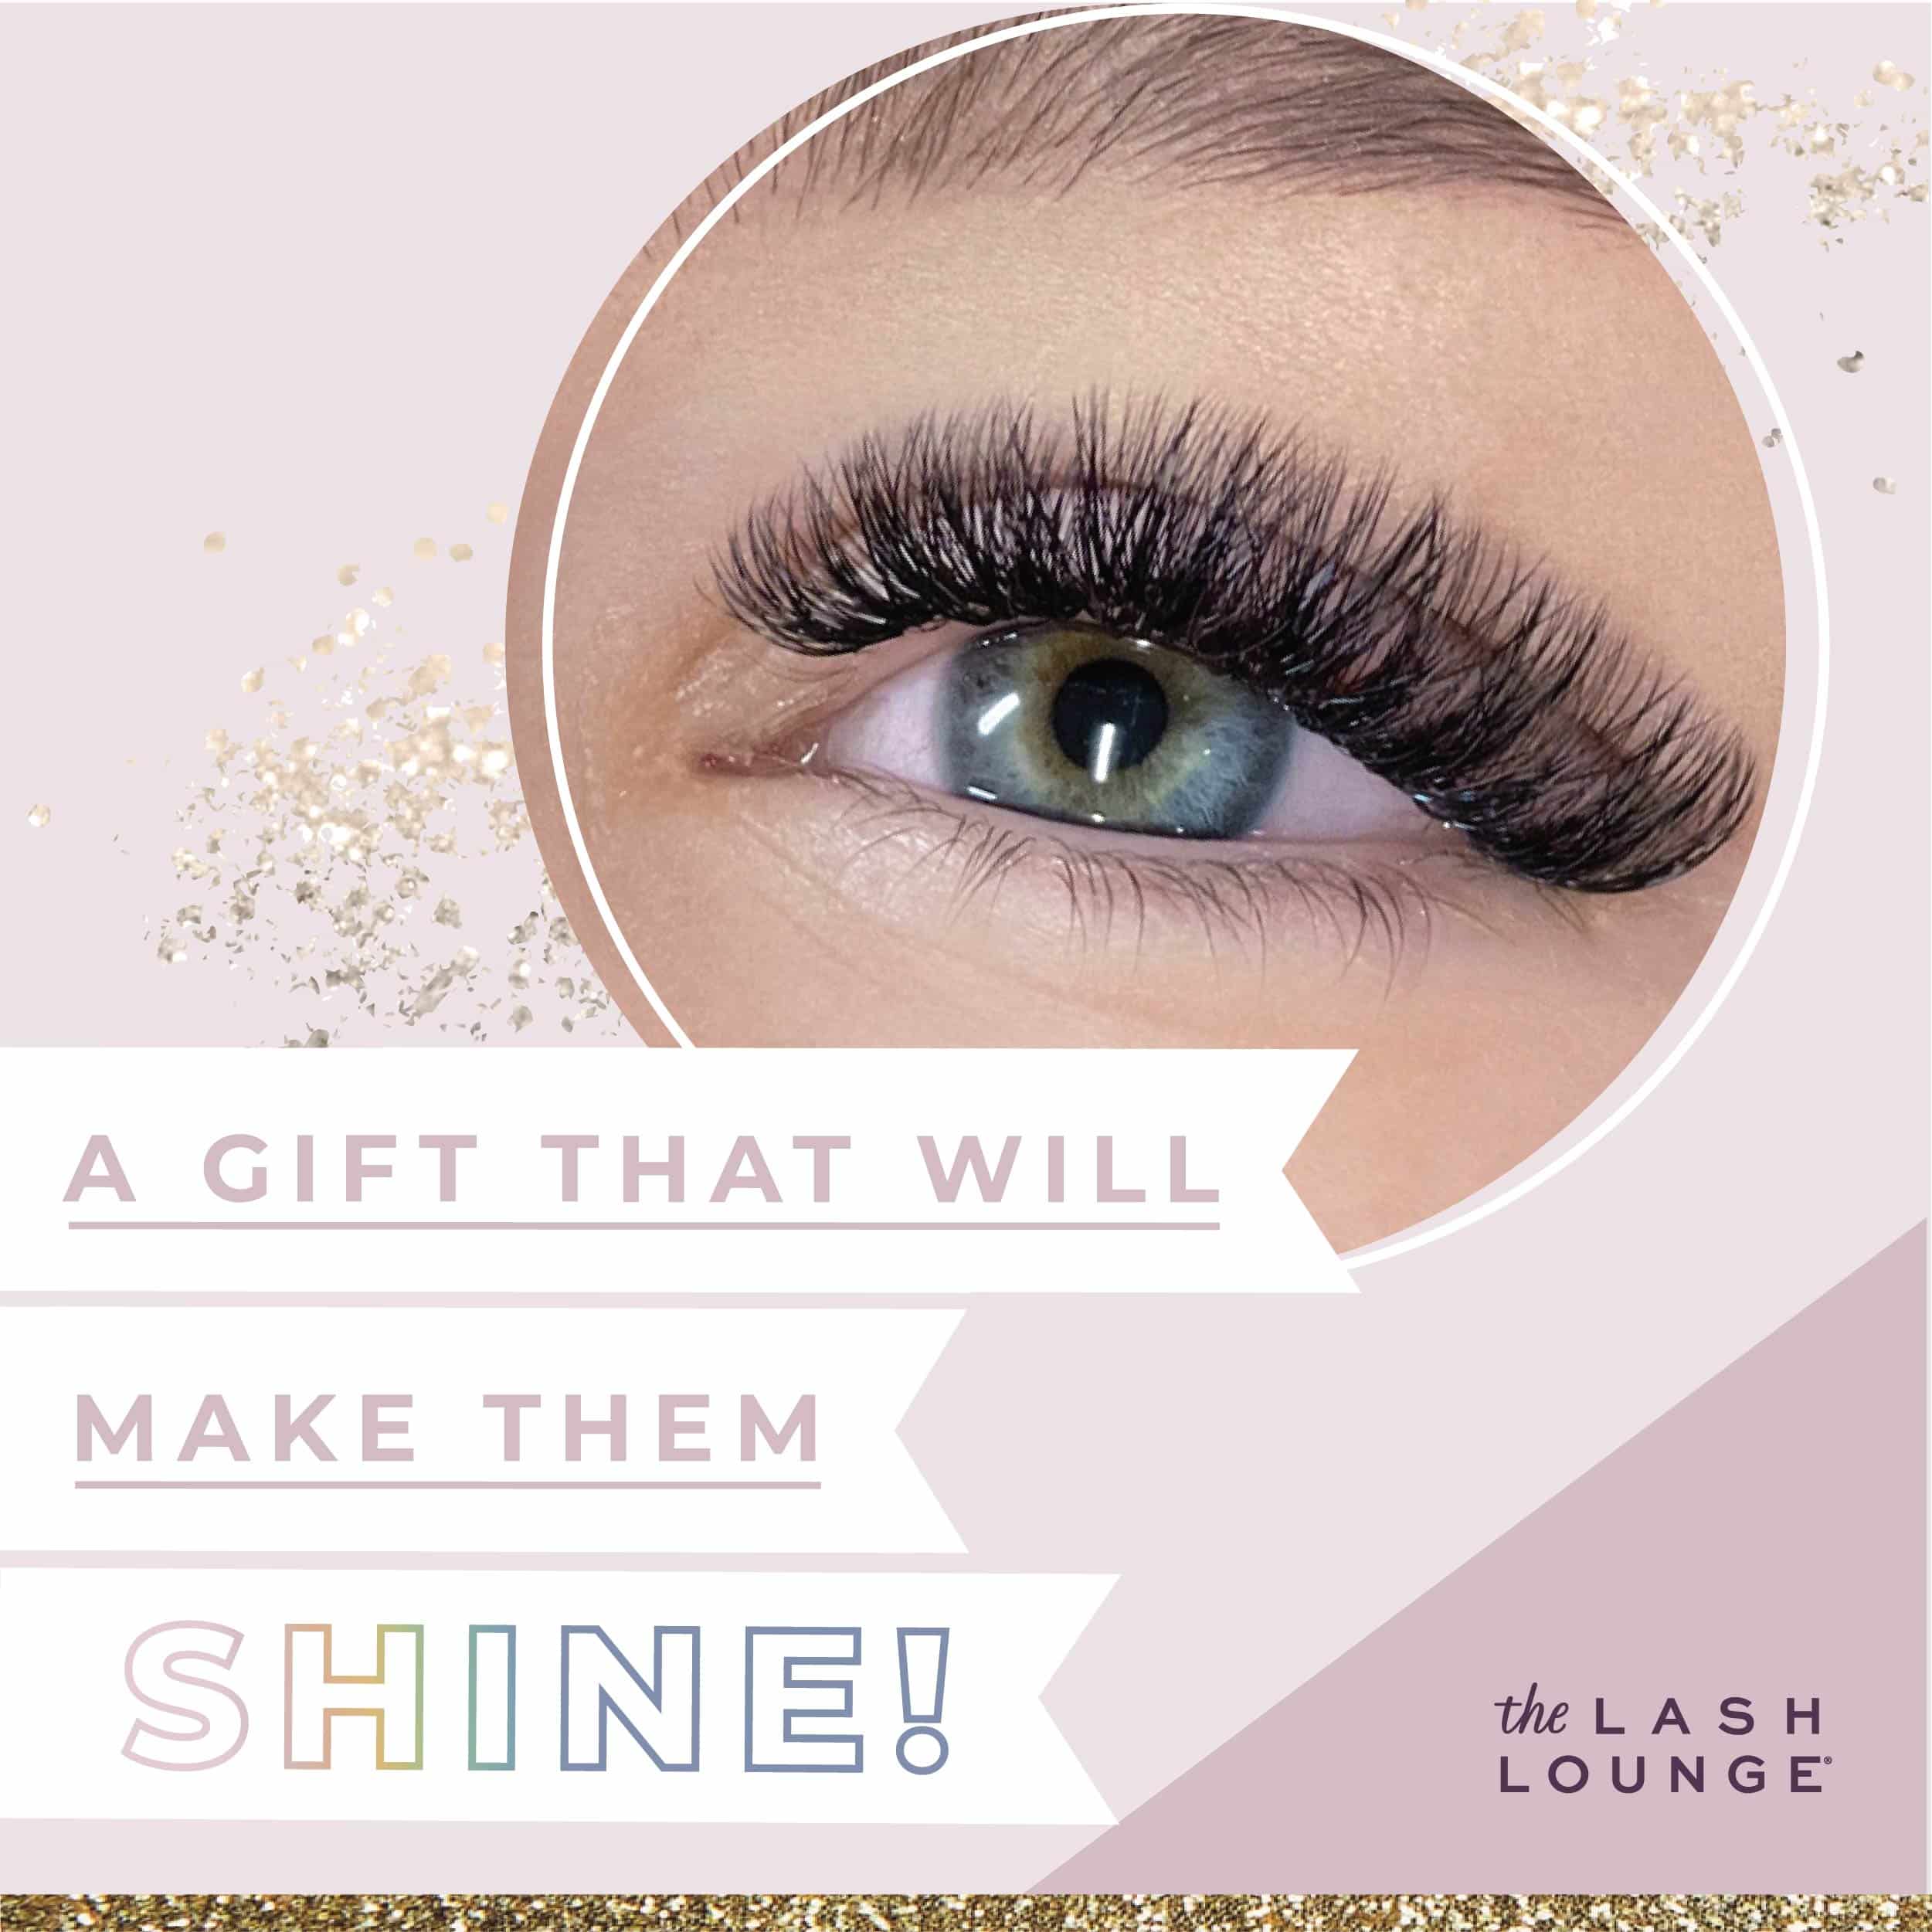 An eye with lash extensions centered in a circle frame with graphic text that says "A Gift That Will Make Them Shine!"